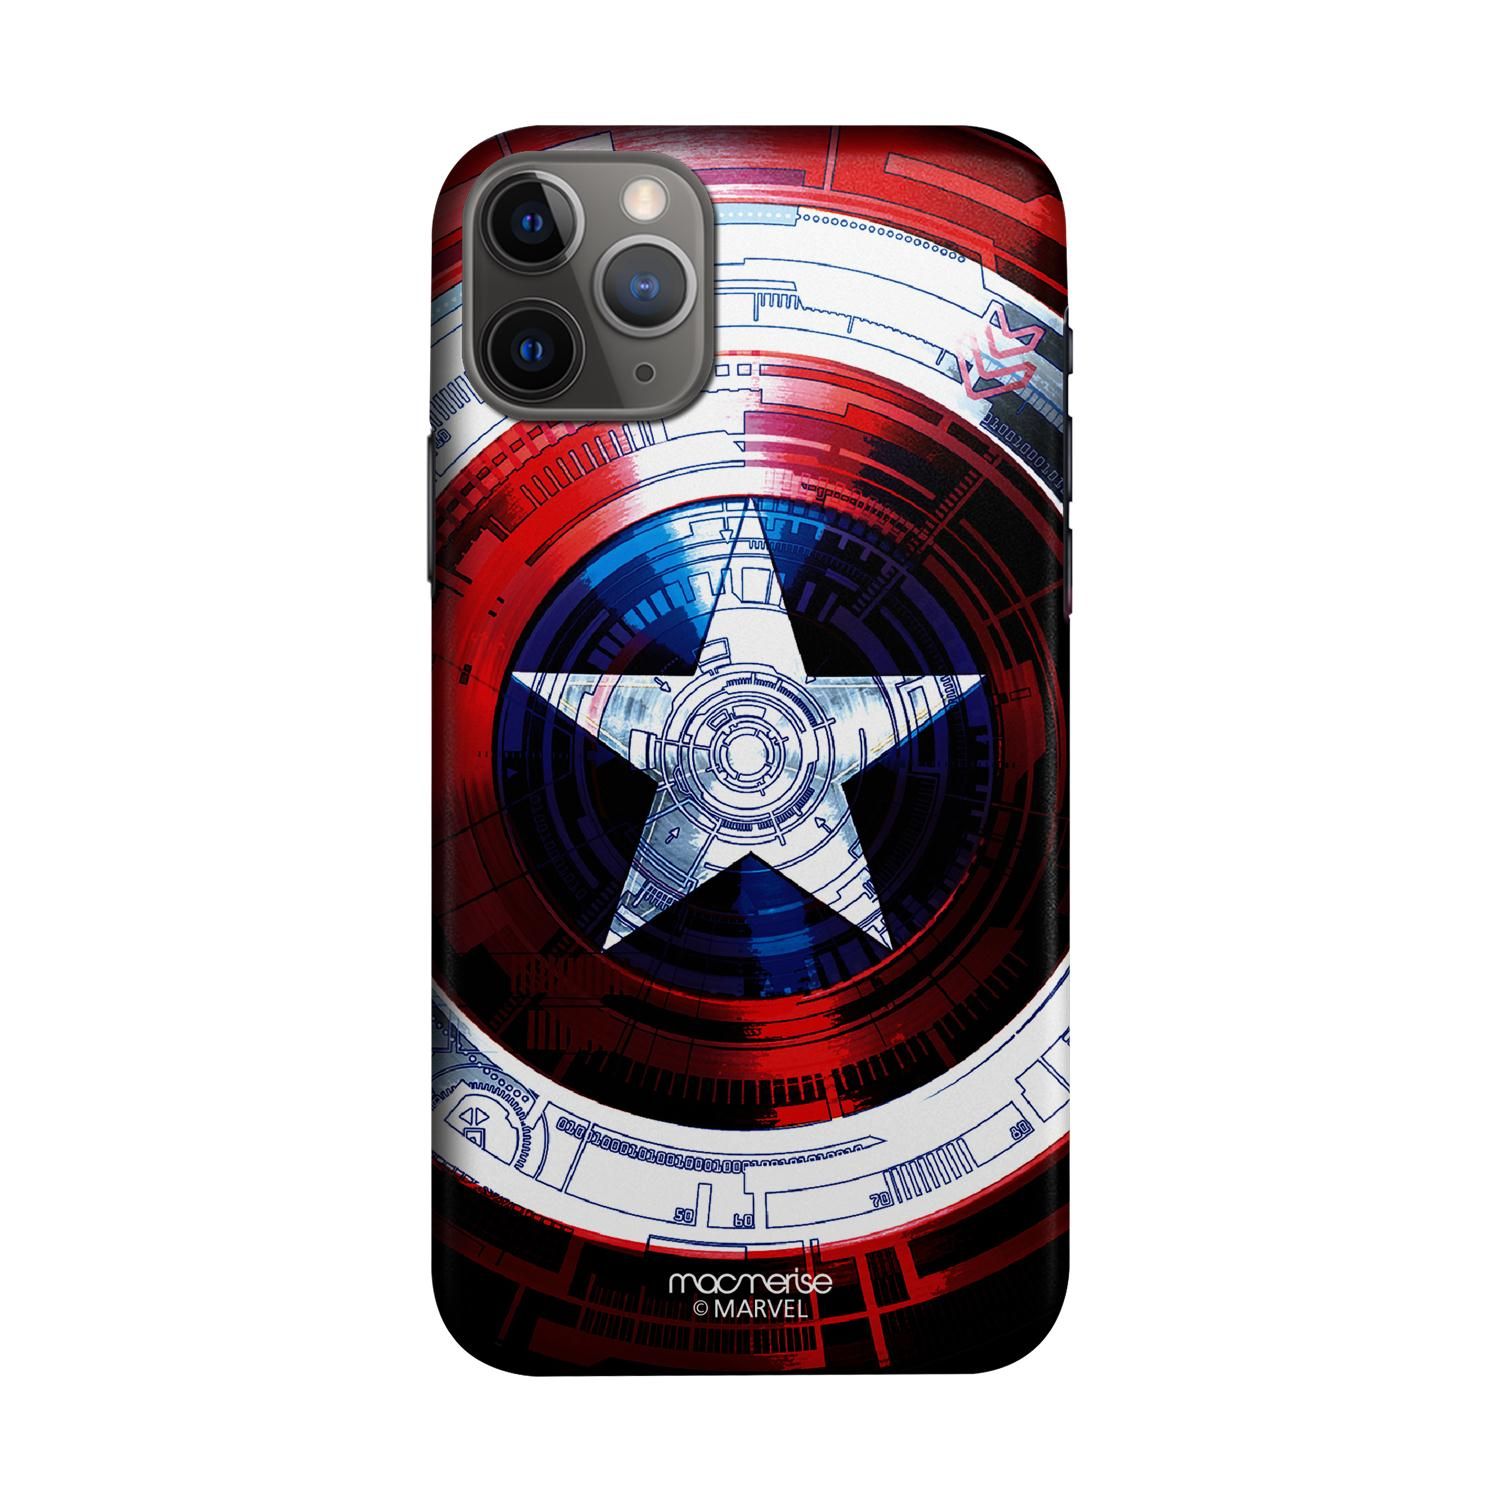 Buy Captains Shield Decoded - Sleek Phone Case for iPhone 11 Pro Max Online